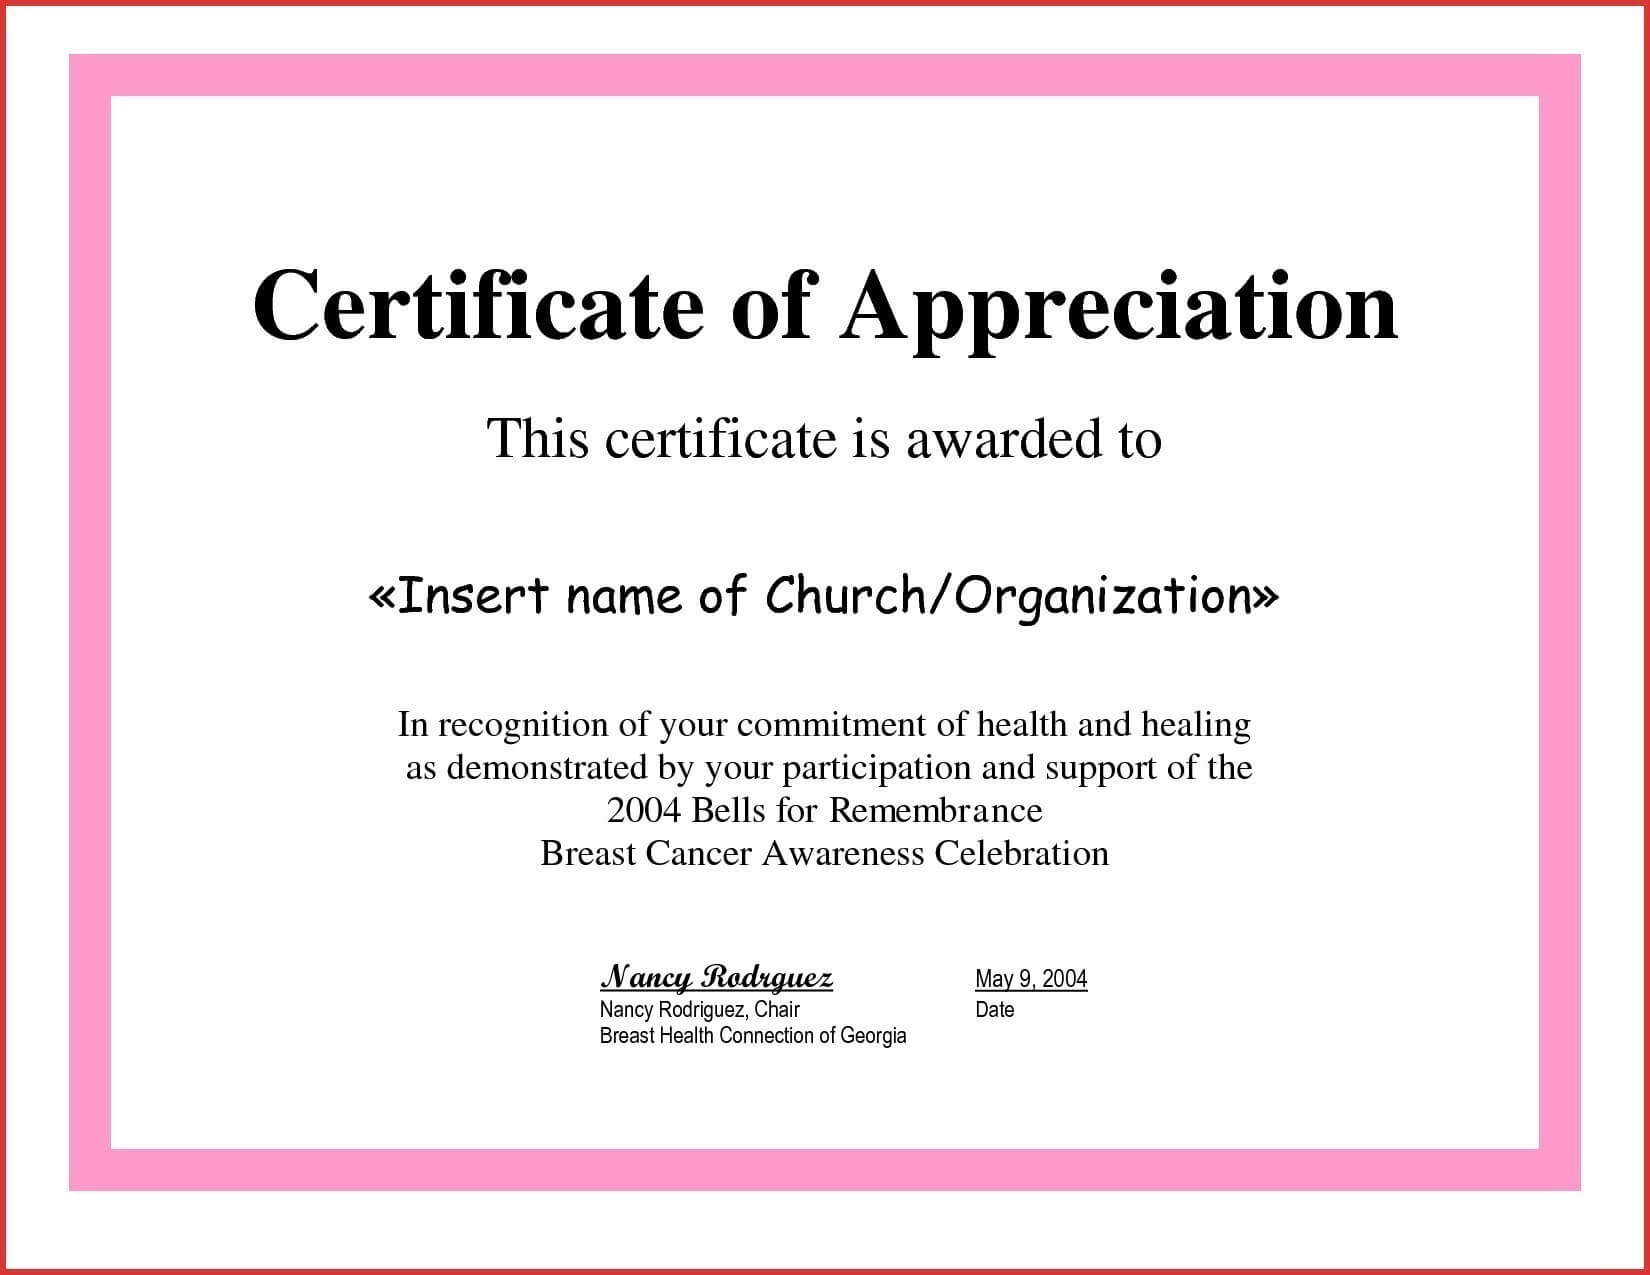 Employee Recognition Certificate Wording